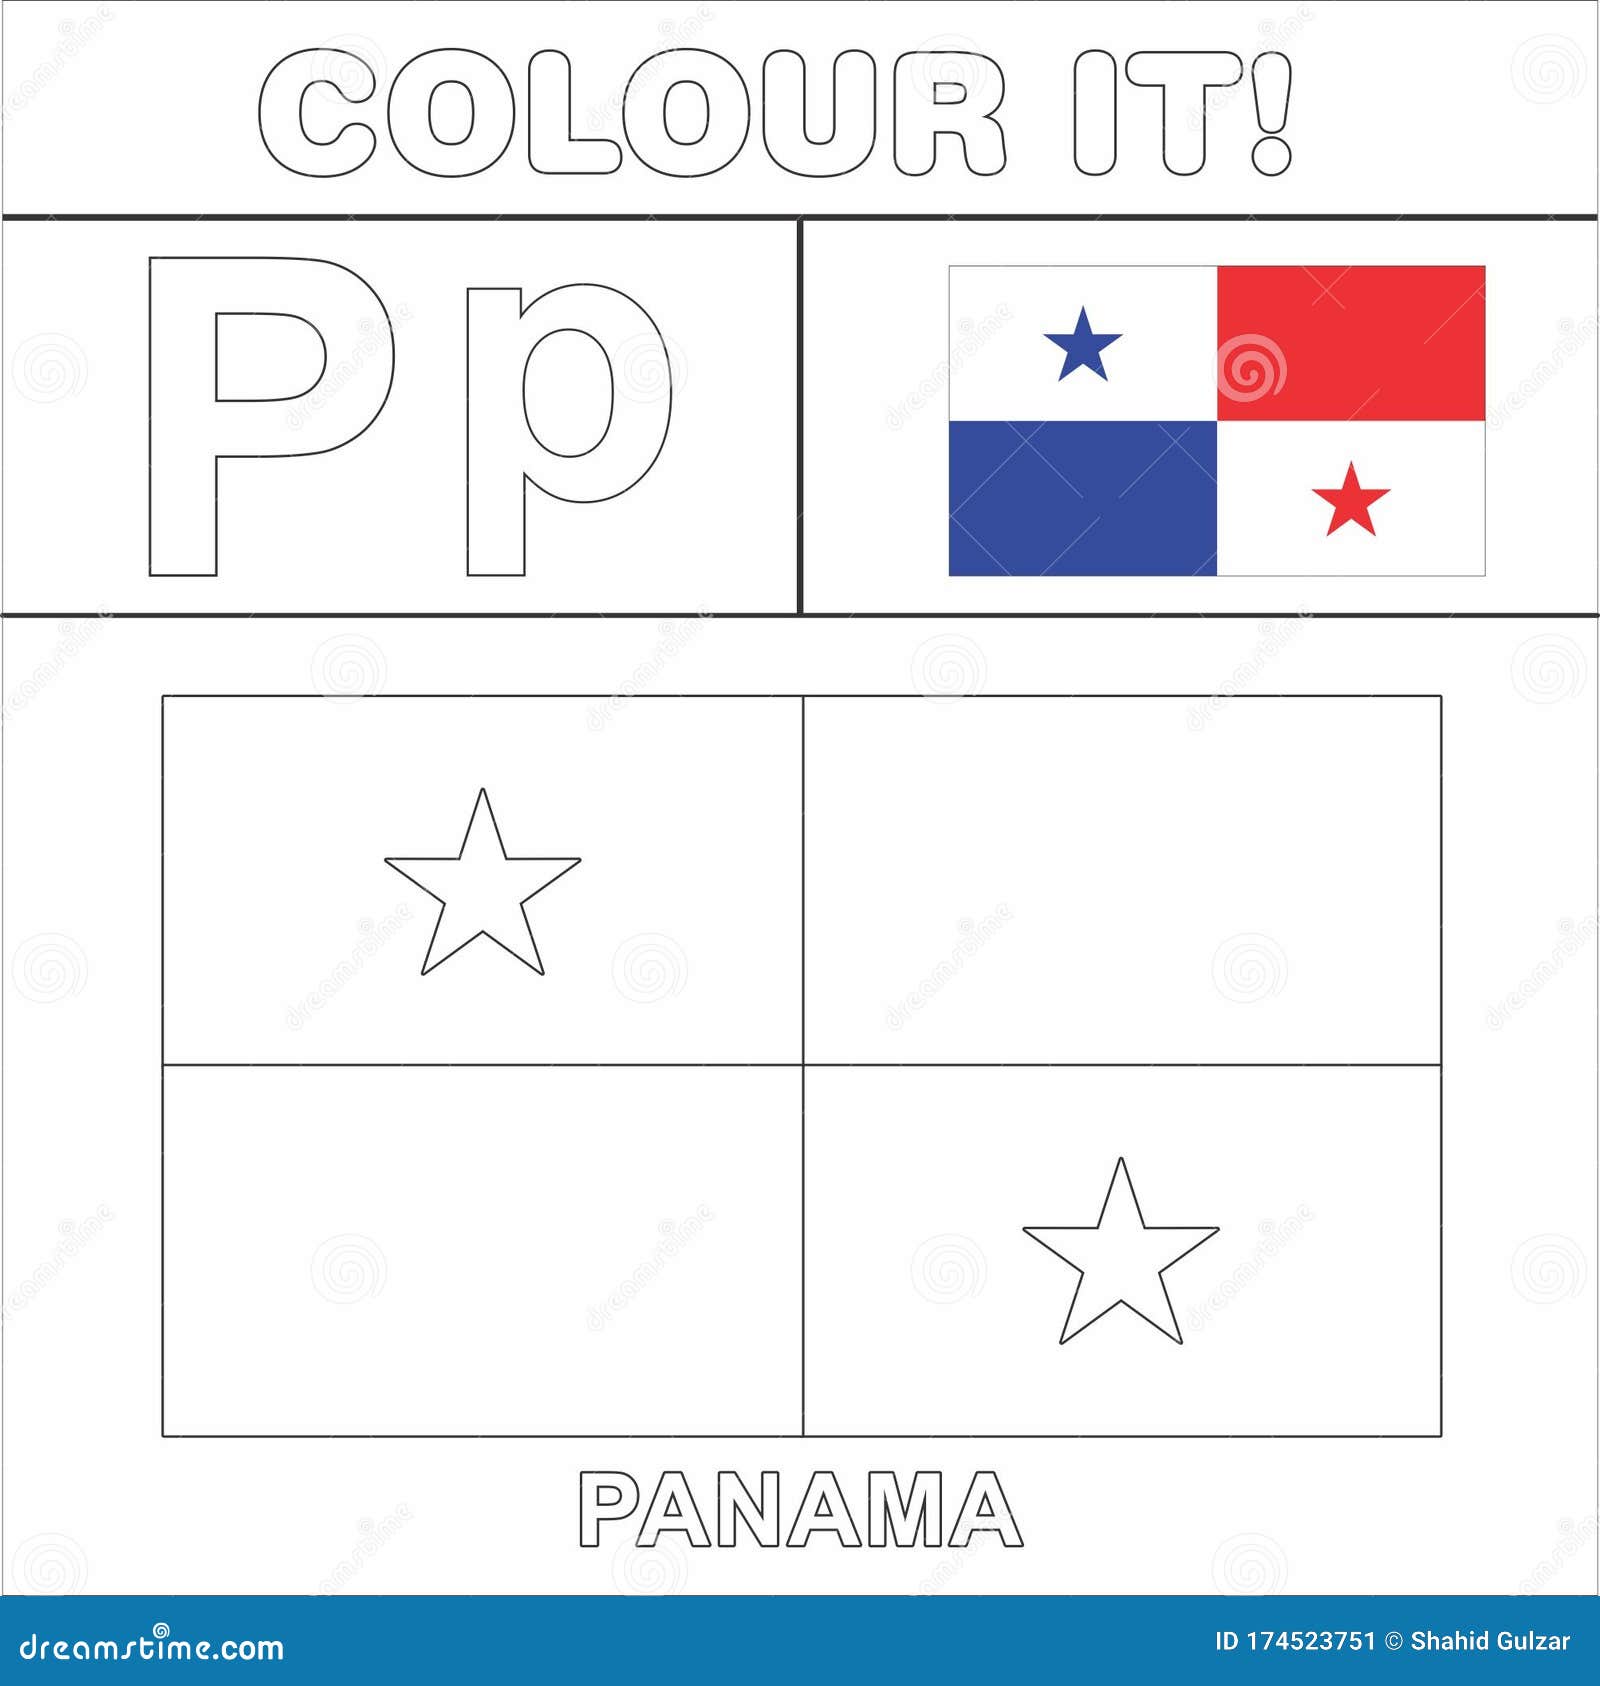 Colour it kids colouring page country starting from english letter p panama how to color flag stock illustration